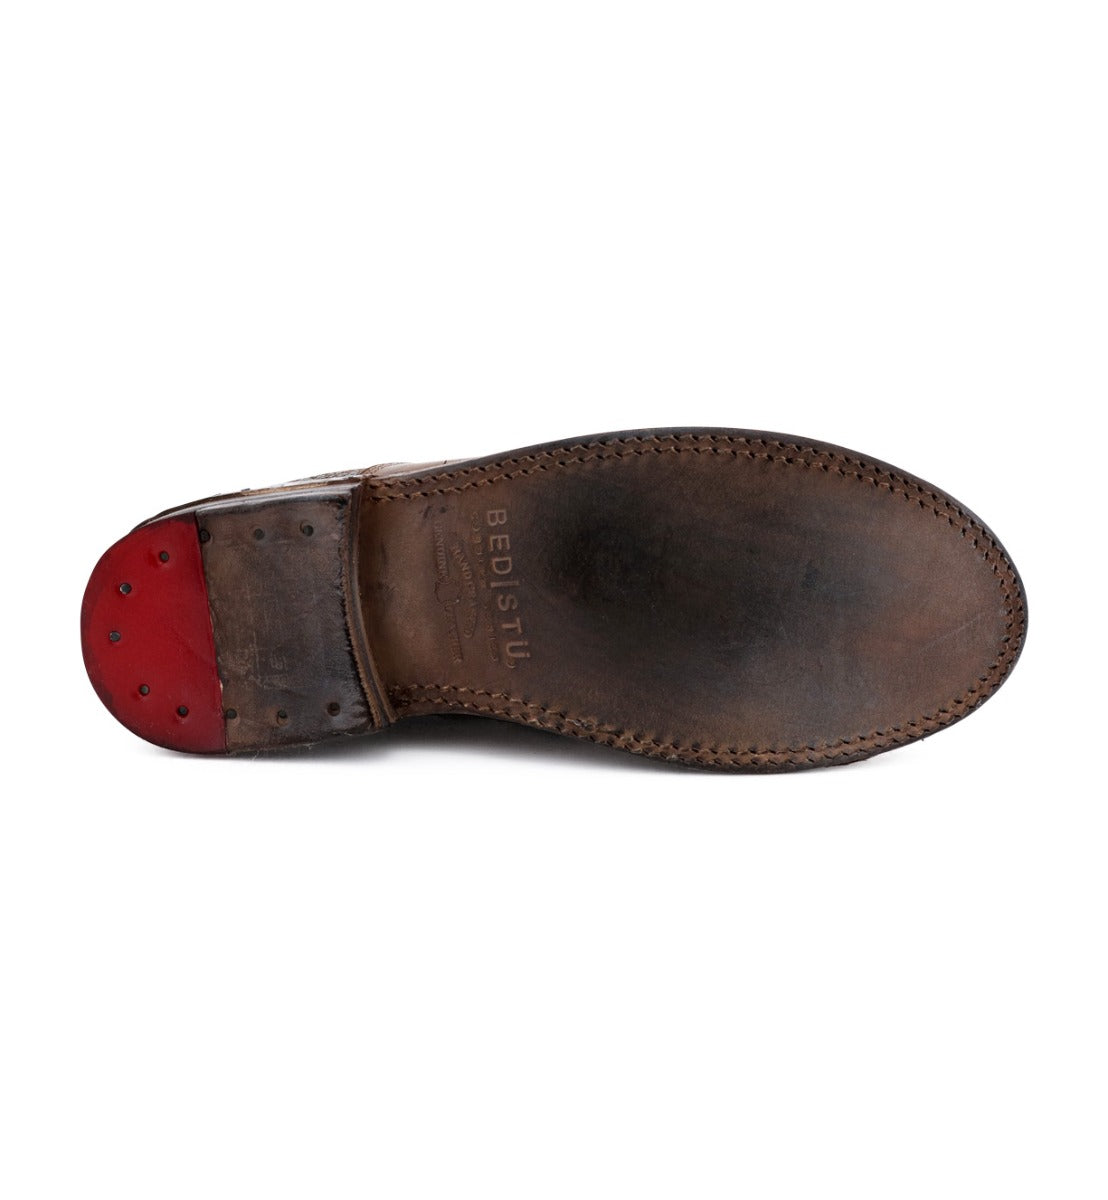 A Rose by Bed Stu brown leather shoe with red soles.